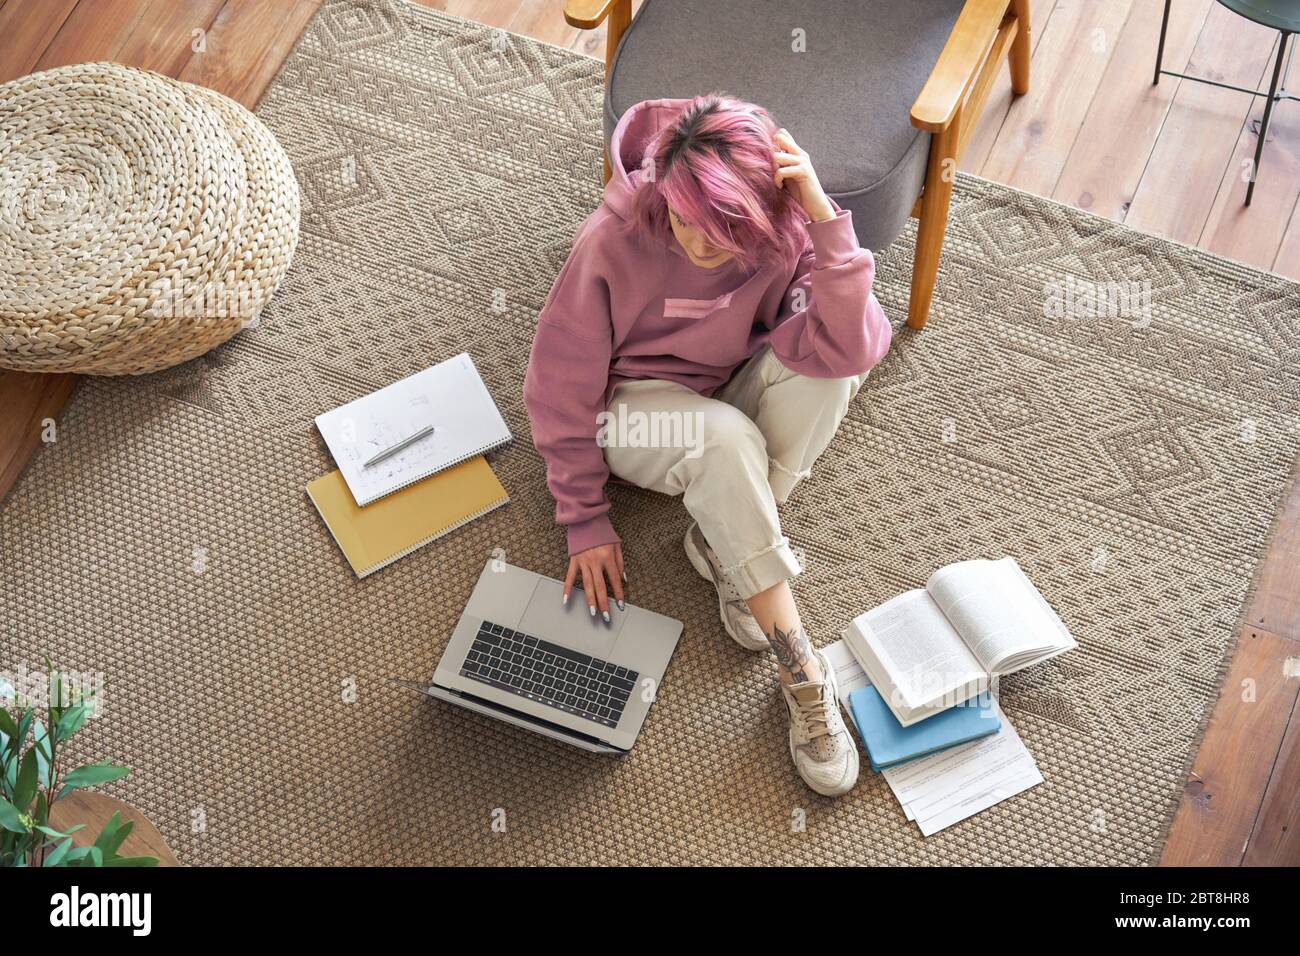 Teen girl school student pink hair using laptop sit on floor elearning top view. Stock Photo